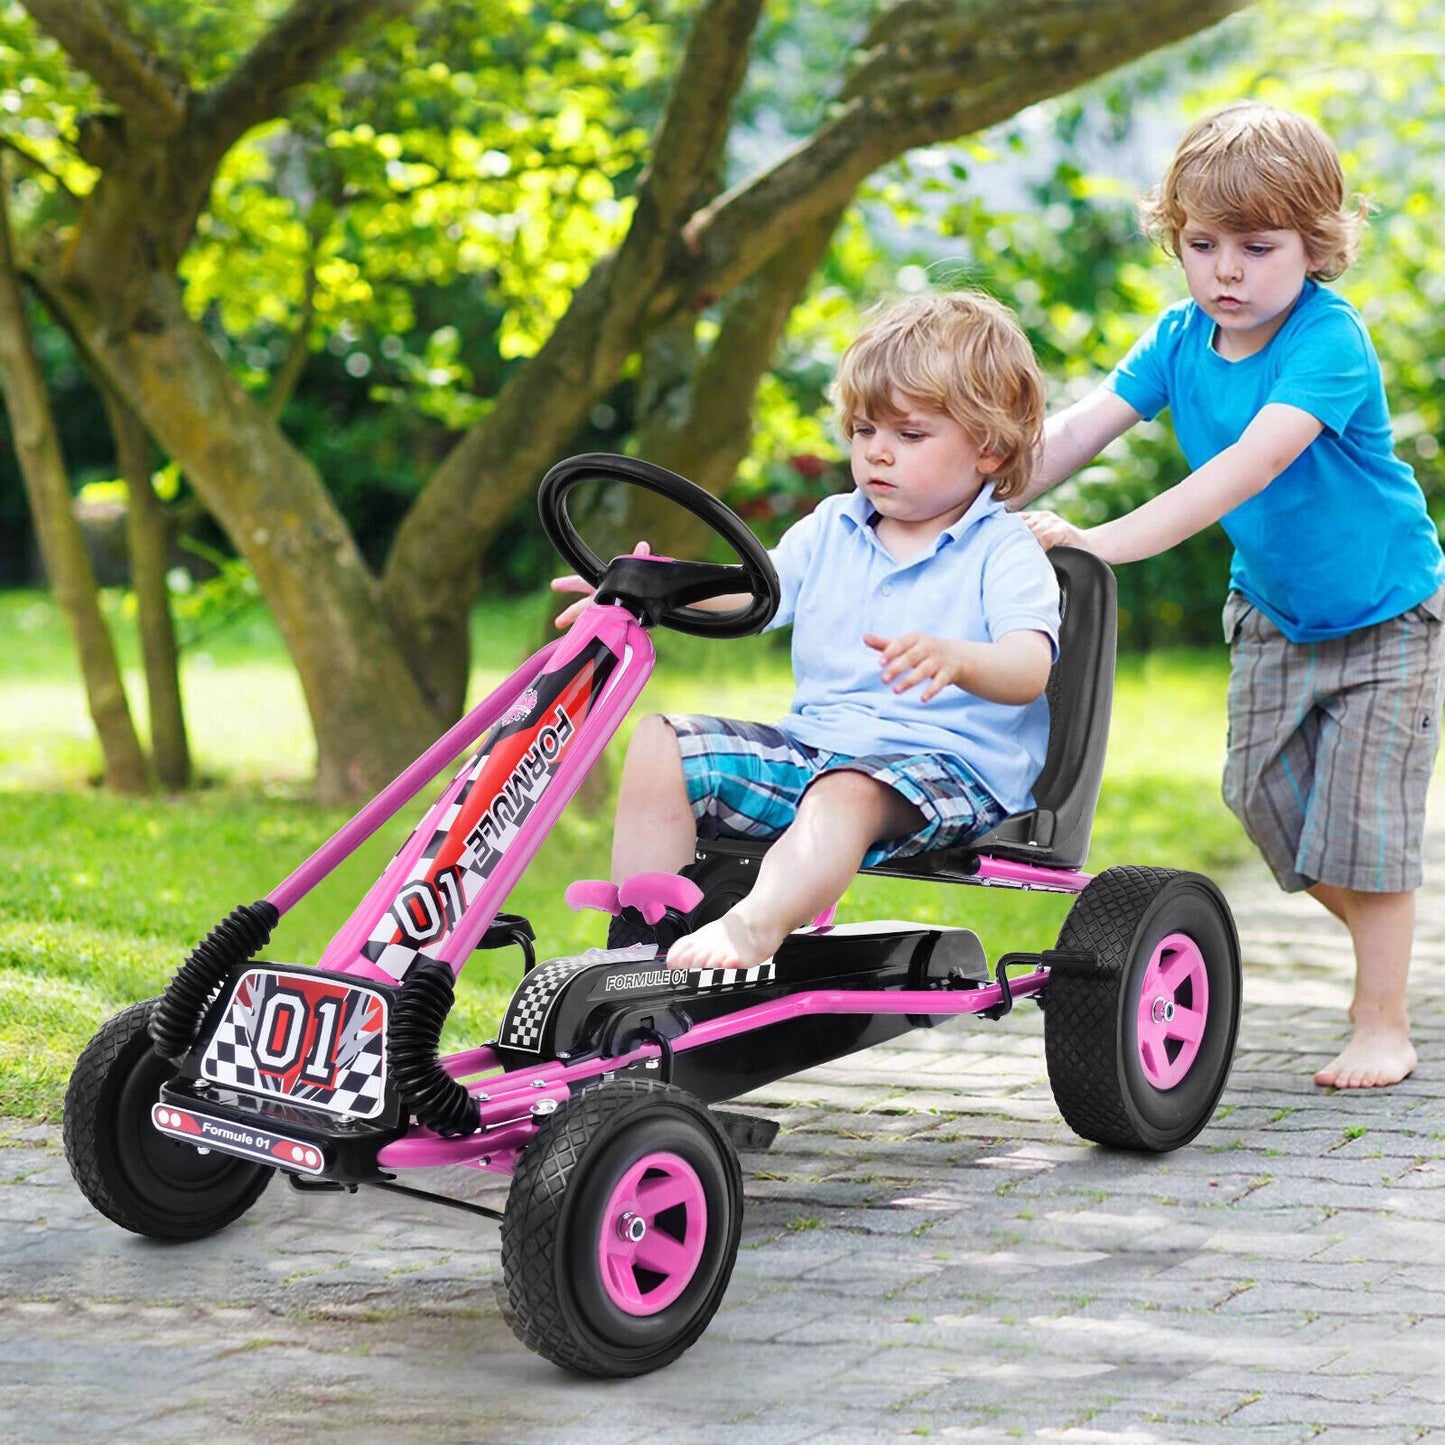 4 Wheels Kids Ride On Pedal Powered Bike Go Kart Racer Car Outdoor Play Toy, Pink